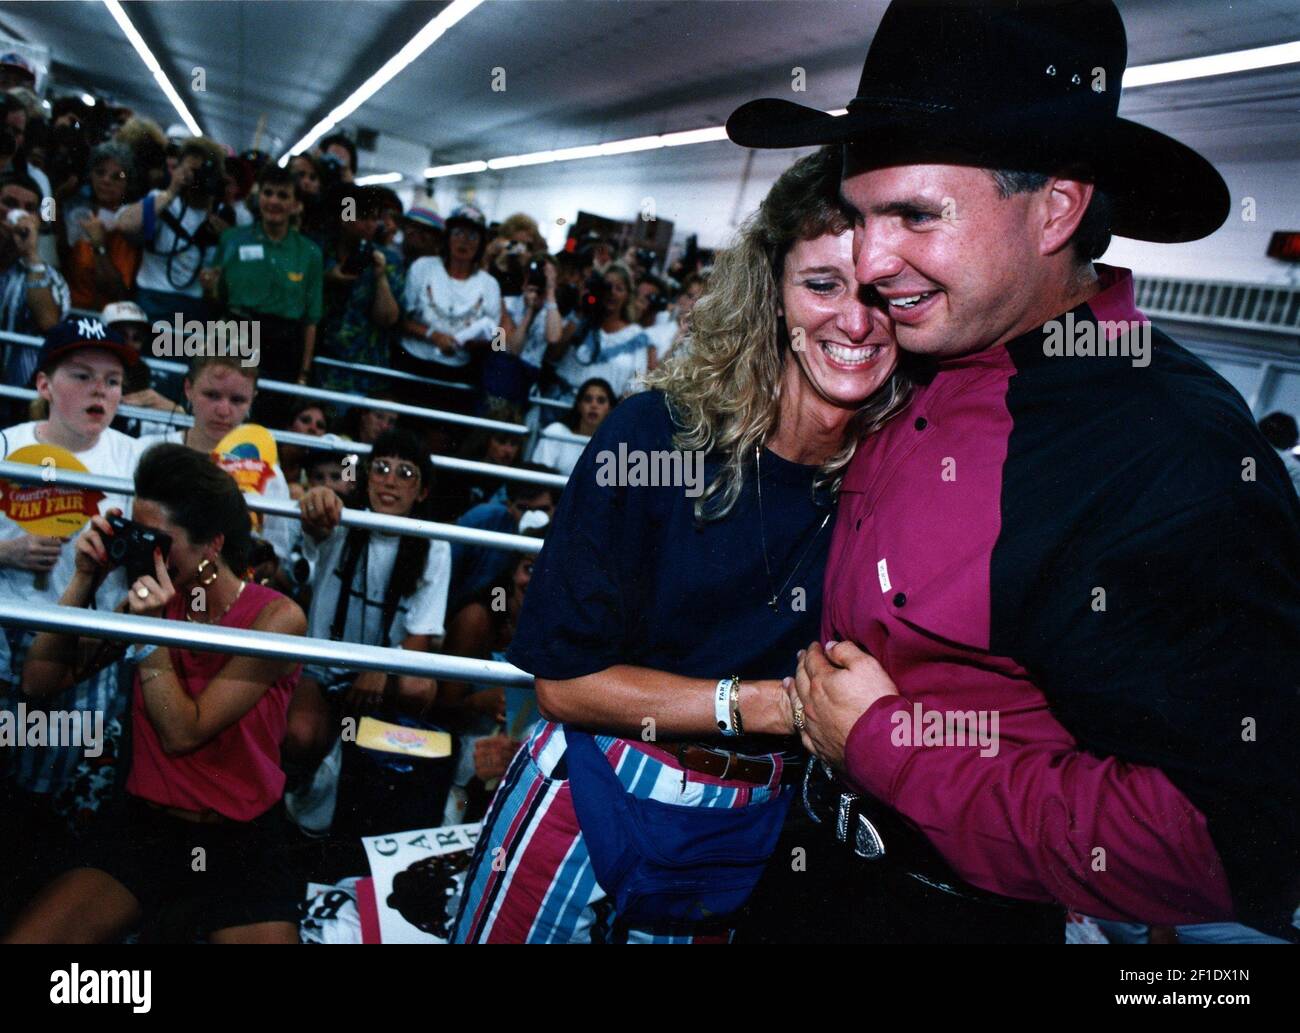 June 10, 1993; Nashville, TN, USA; North Carolinian Iris Winstead gets a big hug from Garth Brooks at his Fan Fair booth at the State Fairgrounds as hundreds of fans wait their turn behind him. Mandatory Credit: The Tennessean via USA TODAY NETWORK/Sipa USA Stock Photo